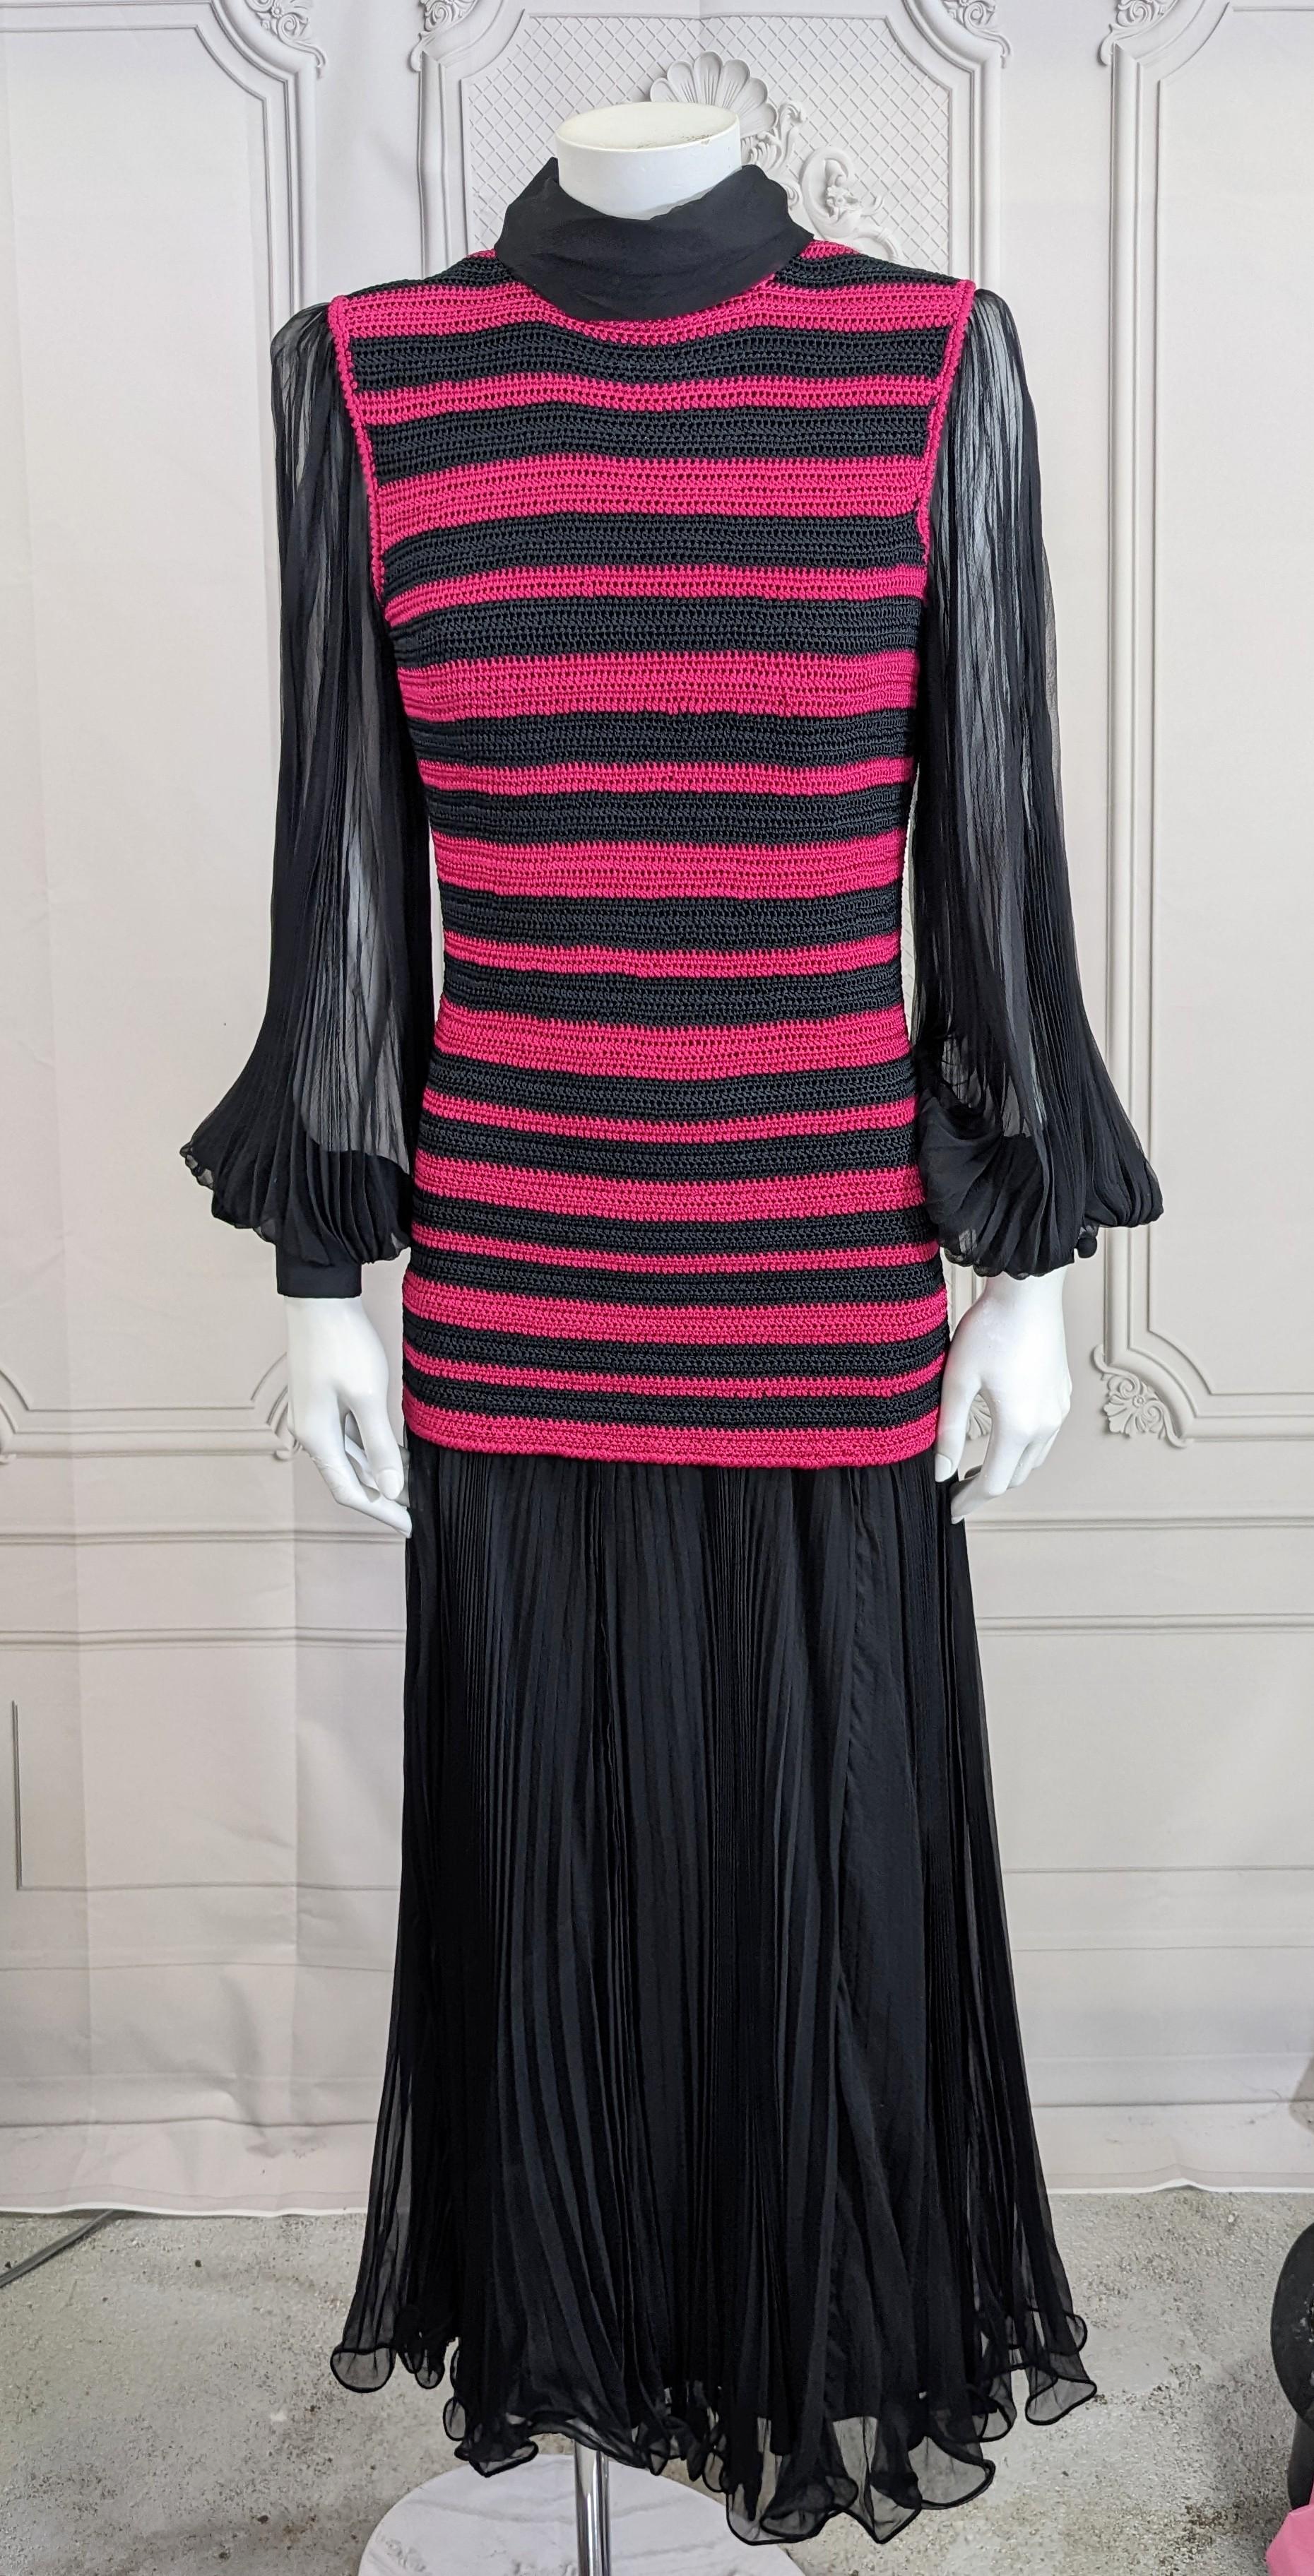 Unique and dramatic Paule Nelson Crochet and Silk Chiffon Pleated Gown, Italy. Black silk chiffon fully knife pleated skirt and sleeves are attached to hand crochet striped tunic in black and fuschia. 
Beautiful quality construction from a rare